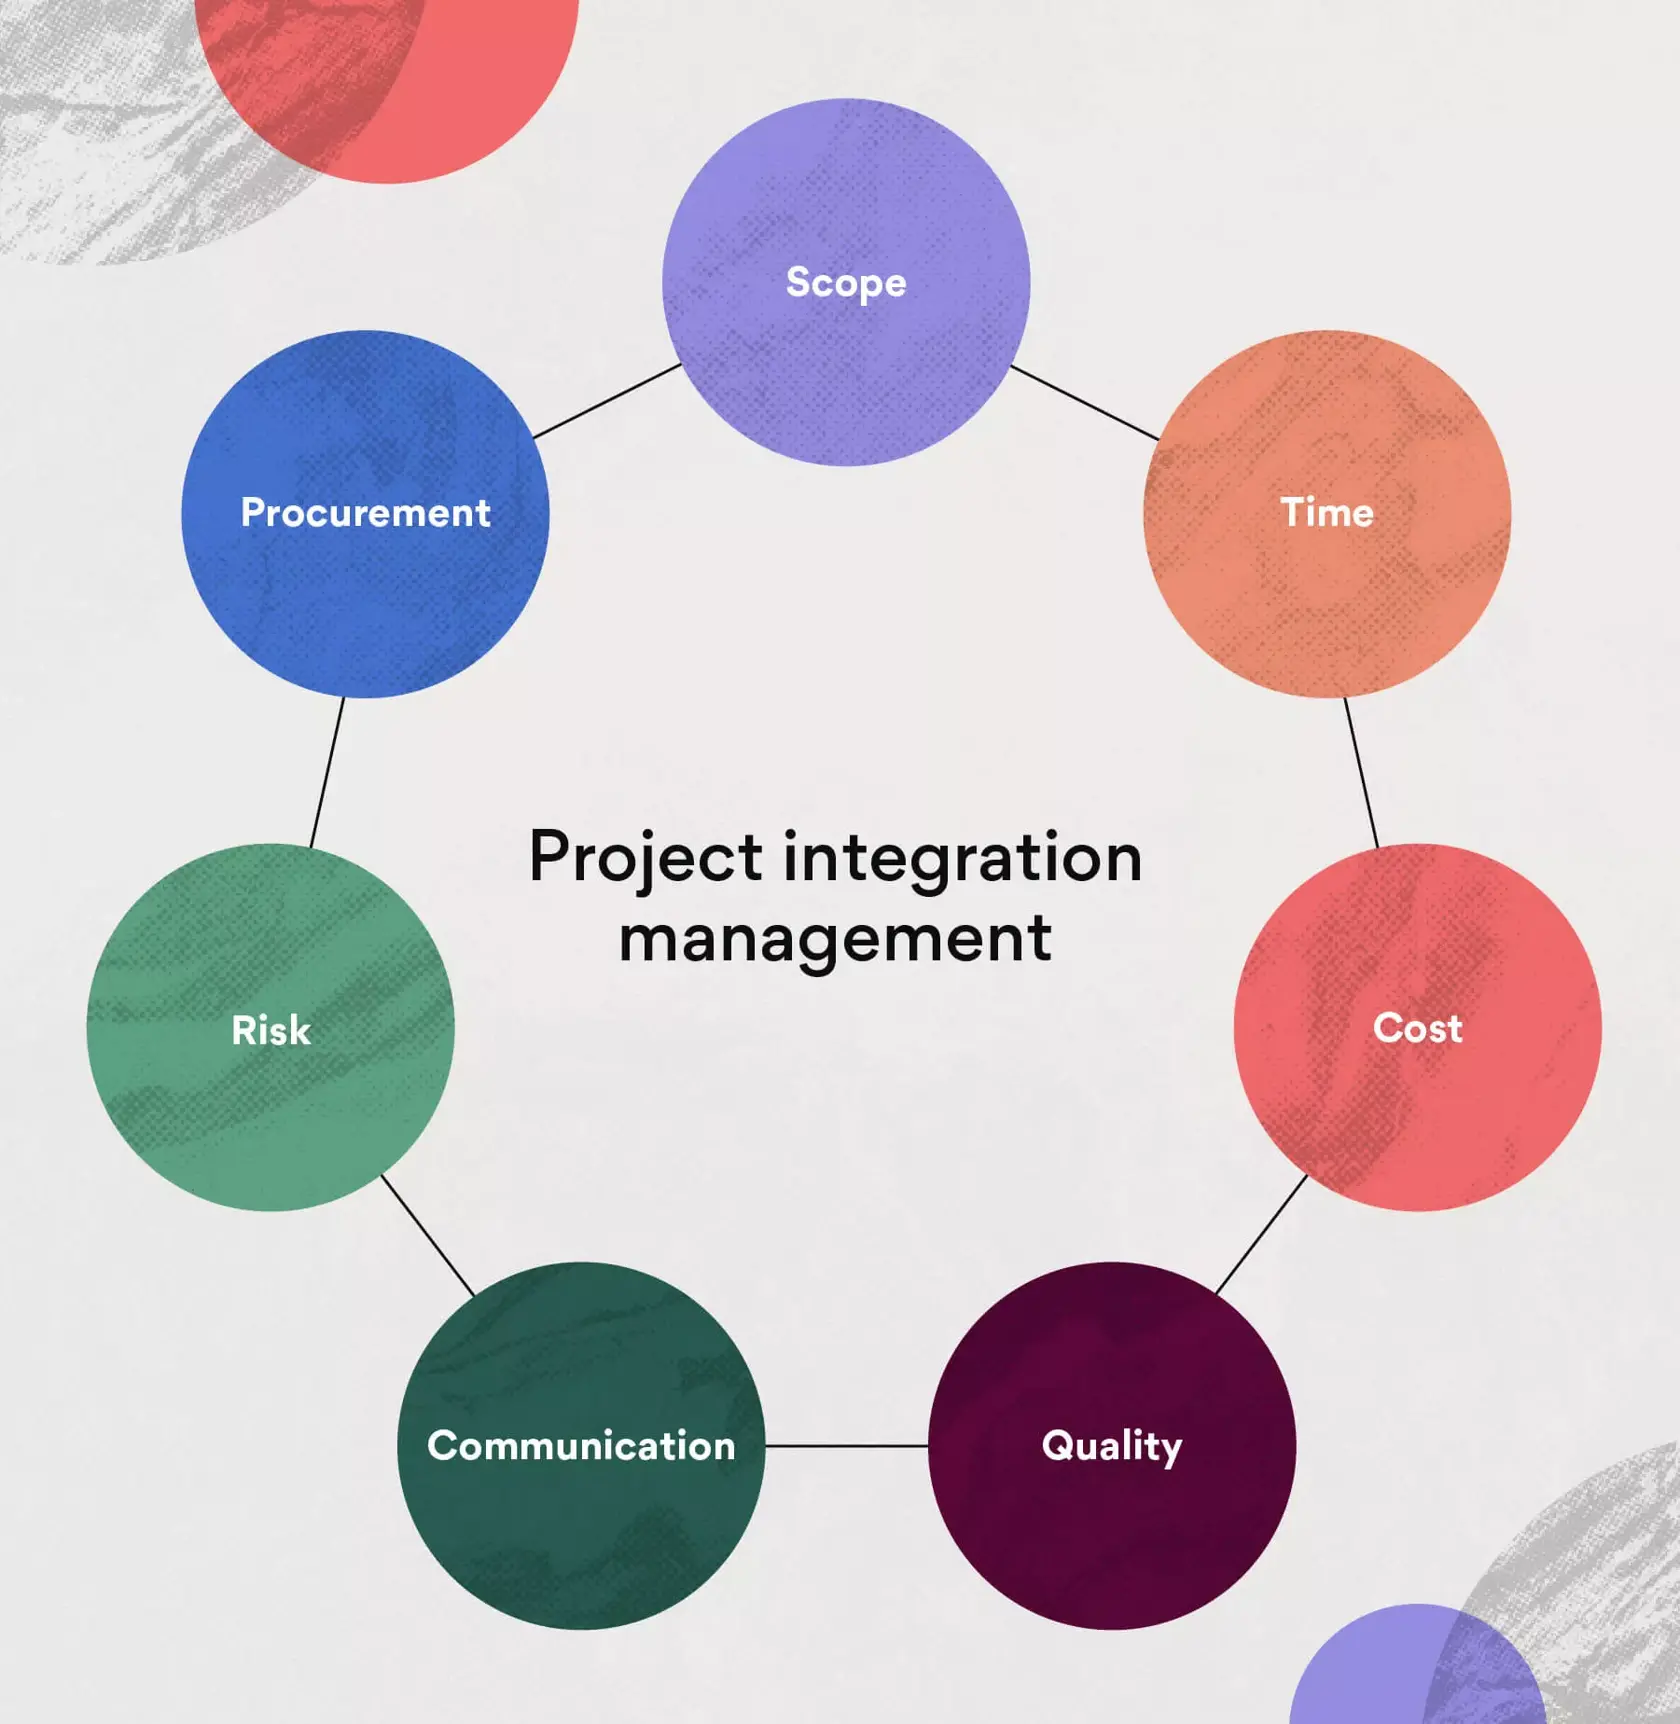 [inline illustration] What is project integration management (infographic)